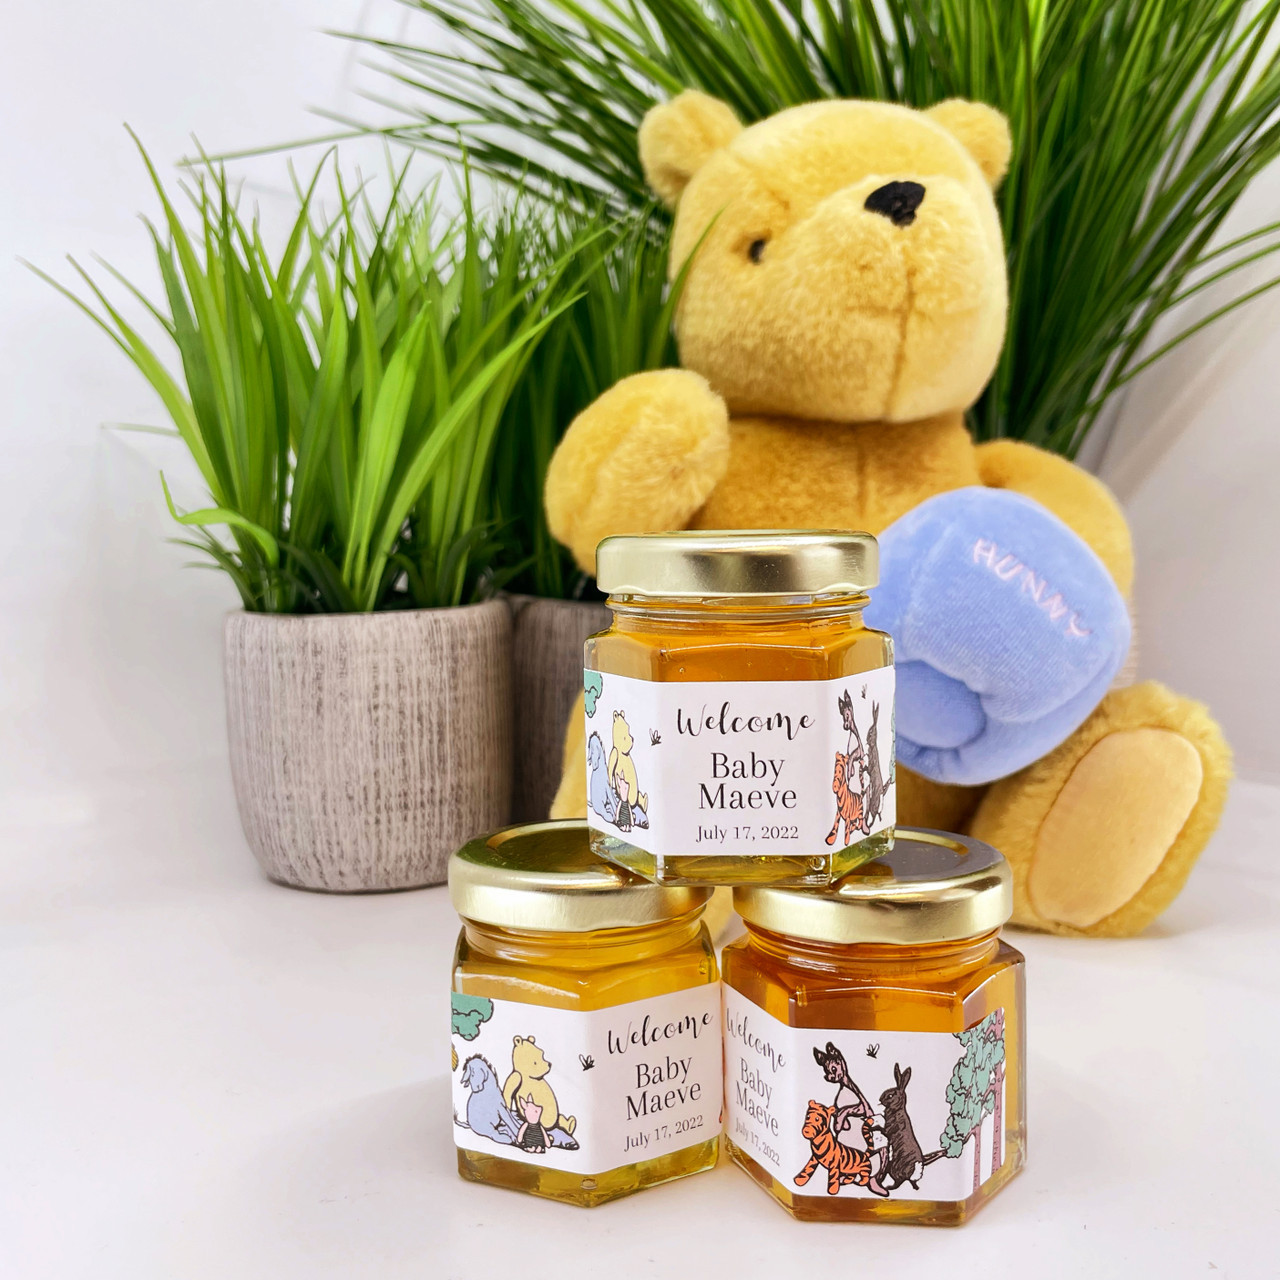 Classic Winnie the Pooh Hundred Acre Wood baby shower honey favor